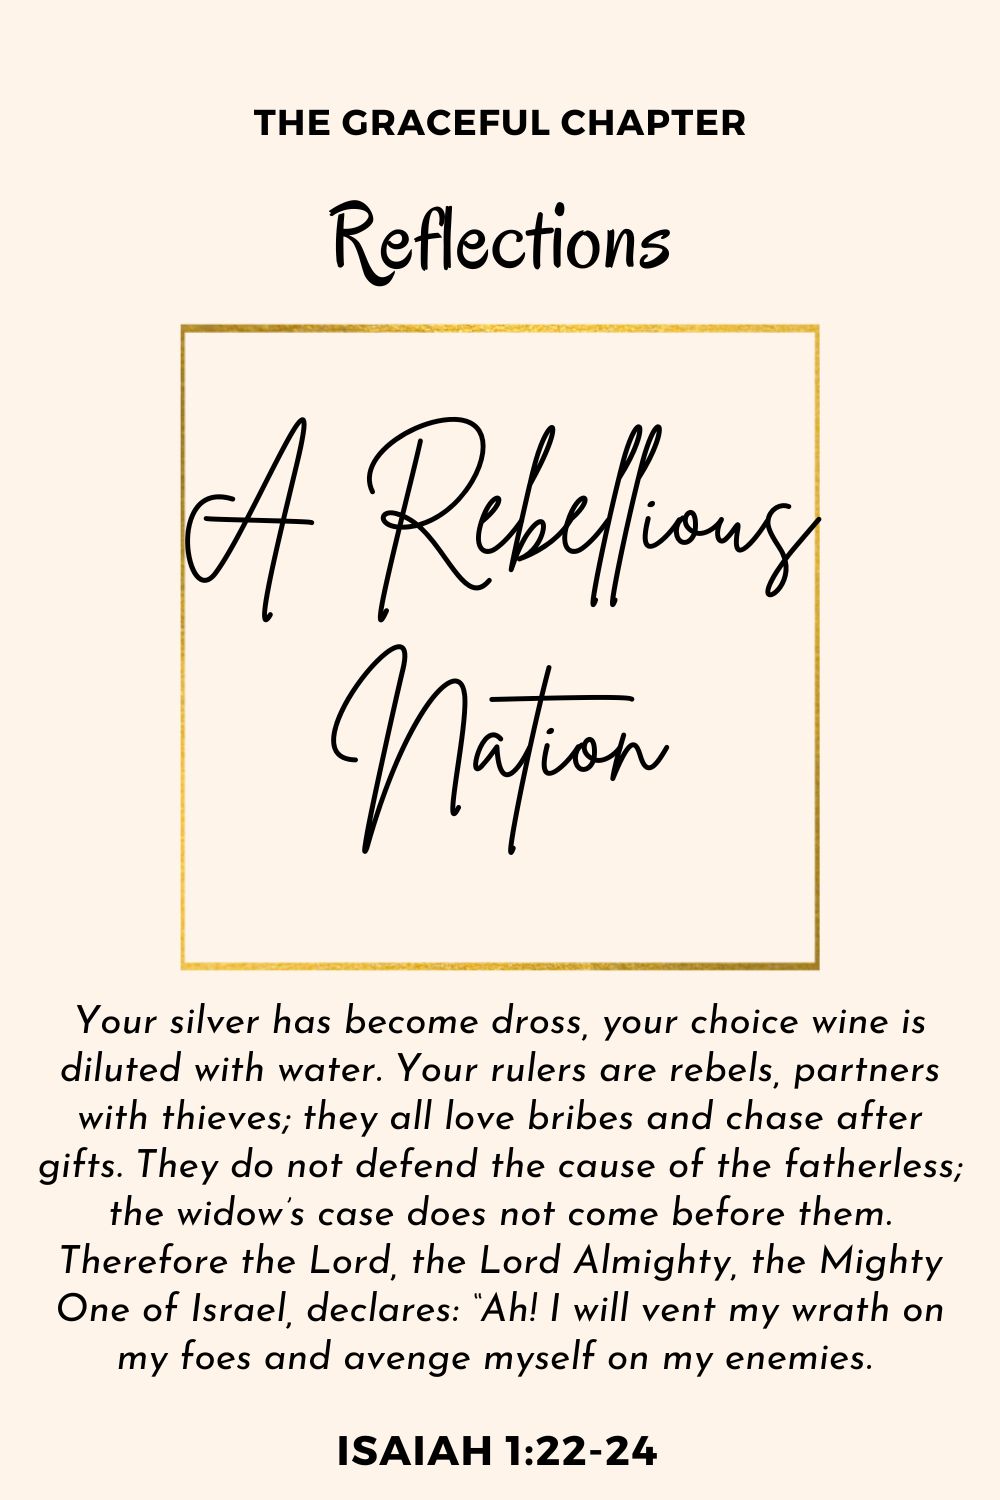 Reflection - Isaiah 1:22-24 - A Rebellious Nation